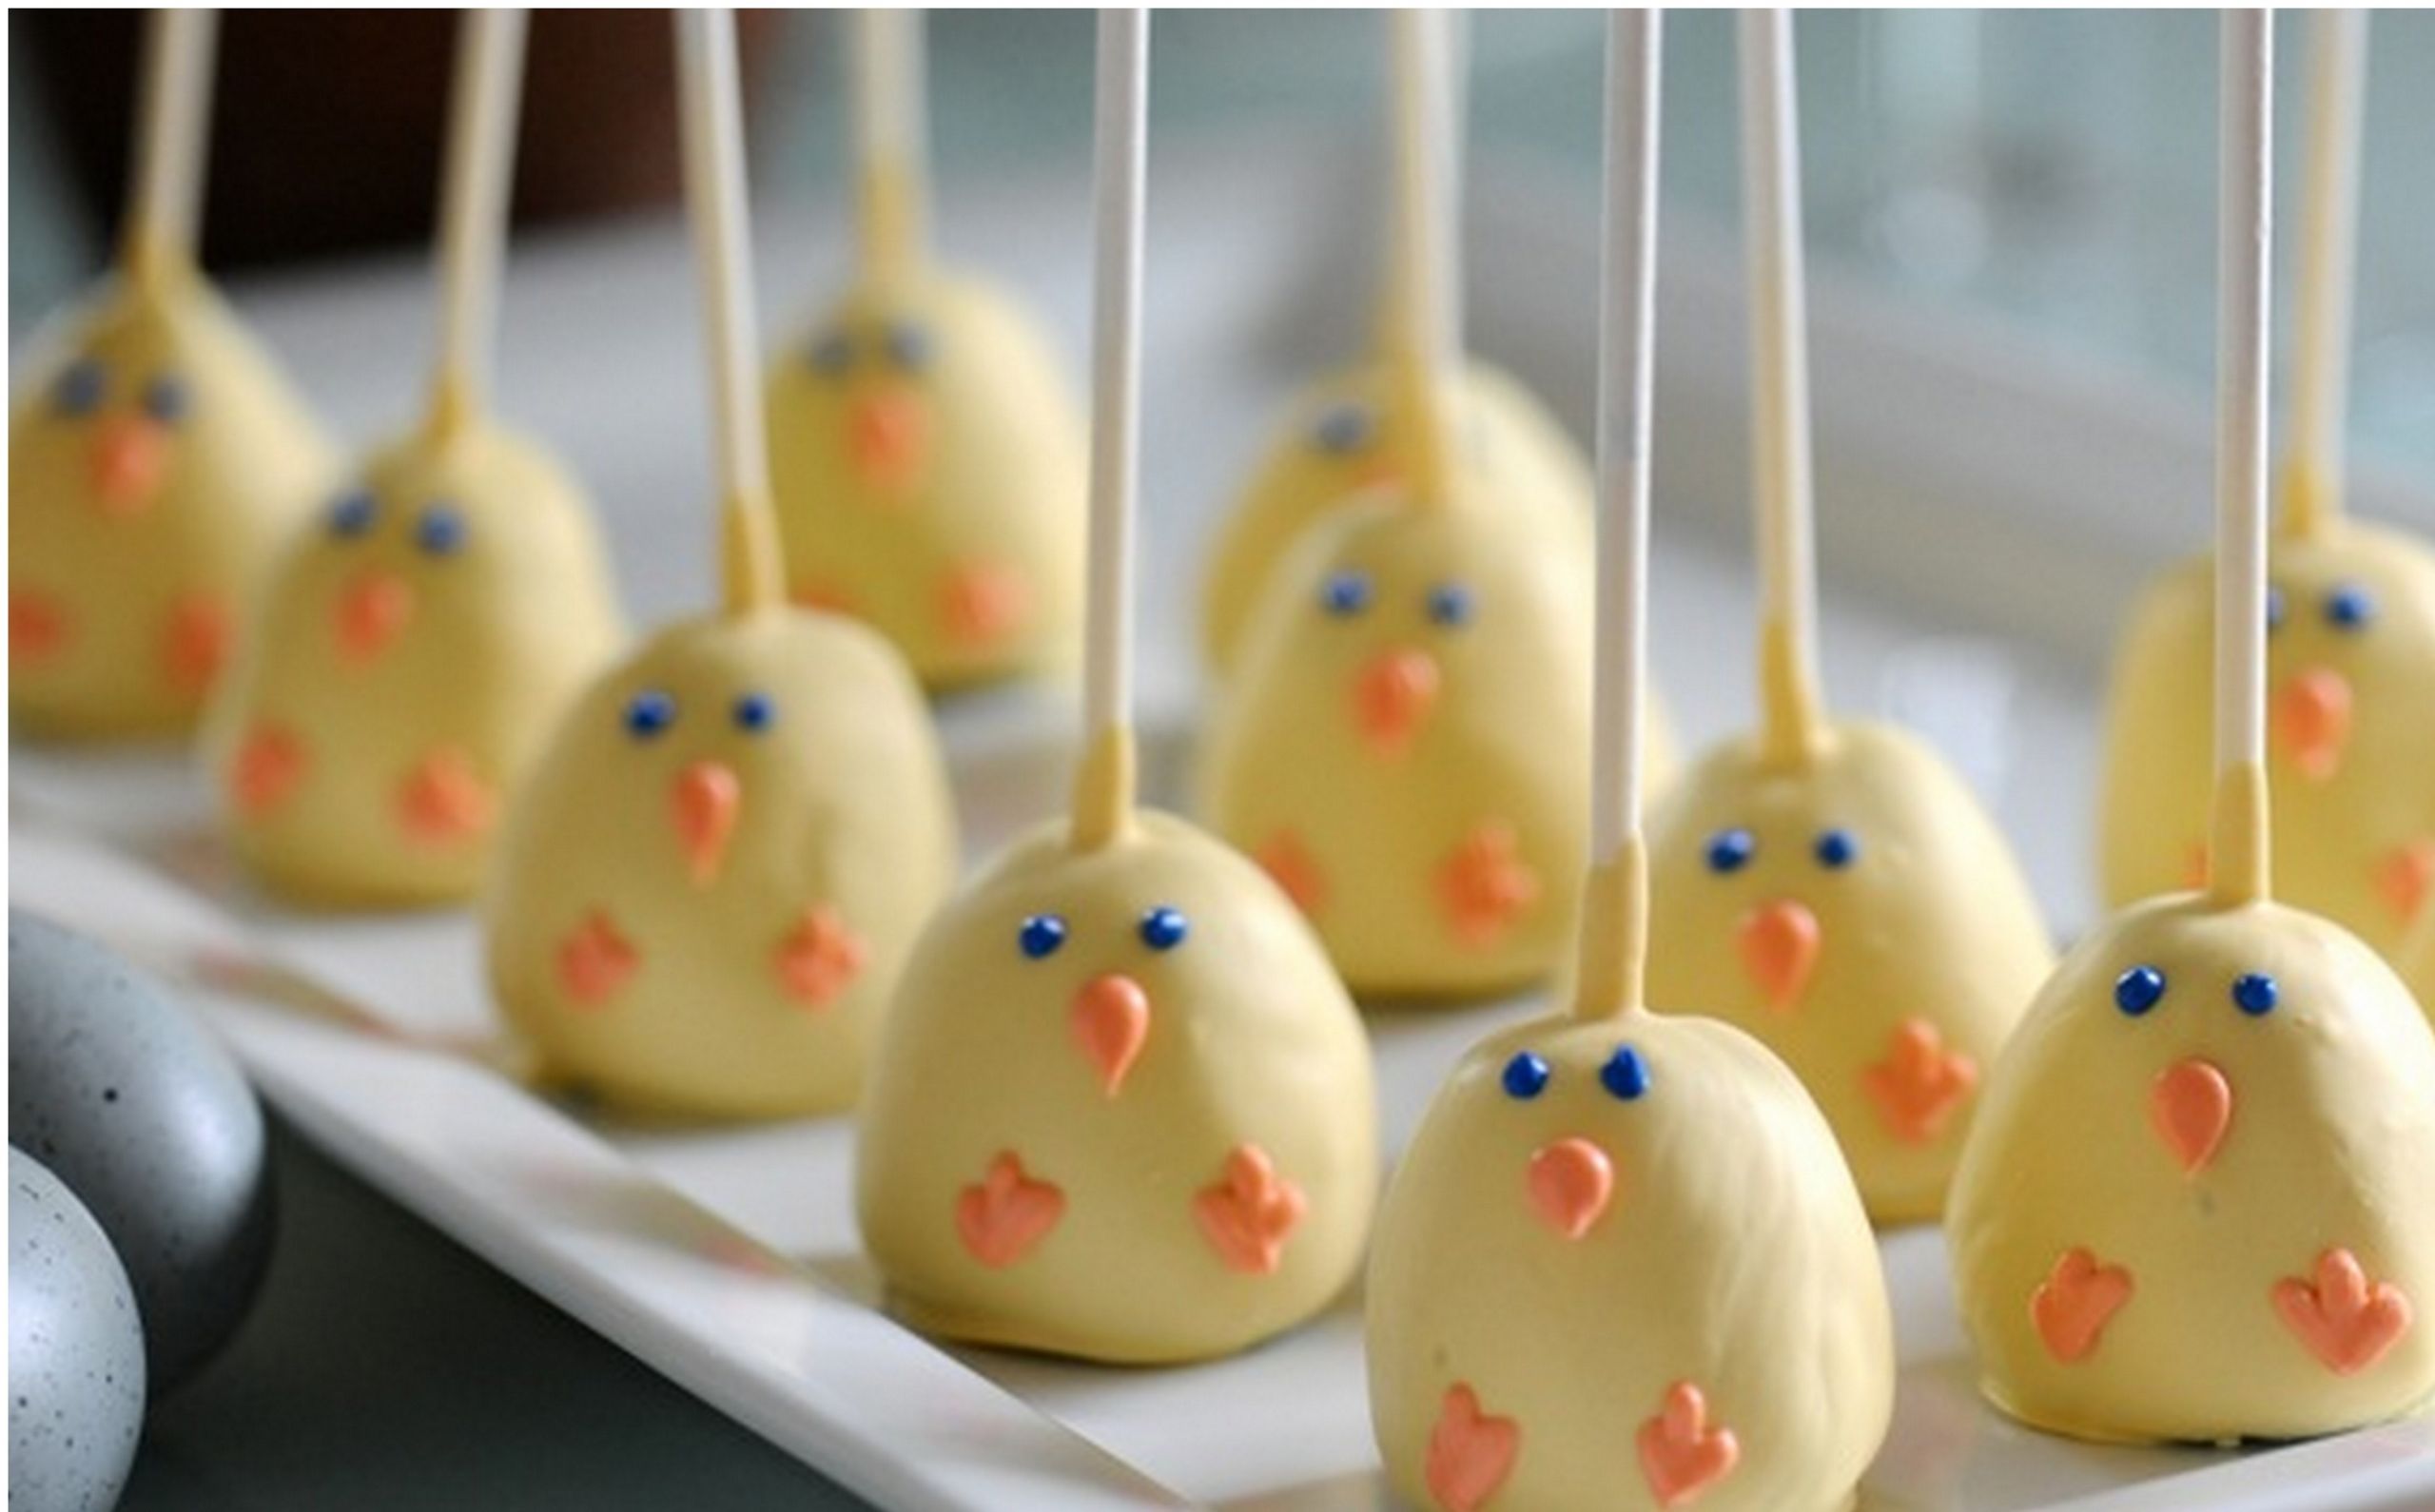 Yummy Easter Desserts
 25 Beautiful & Delicious Easter Desserts